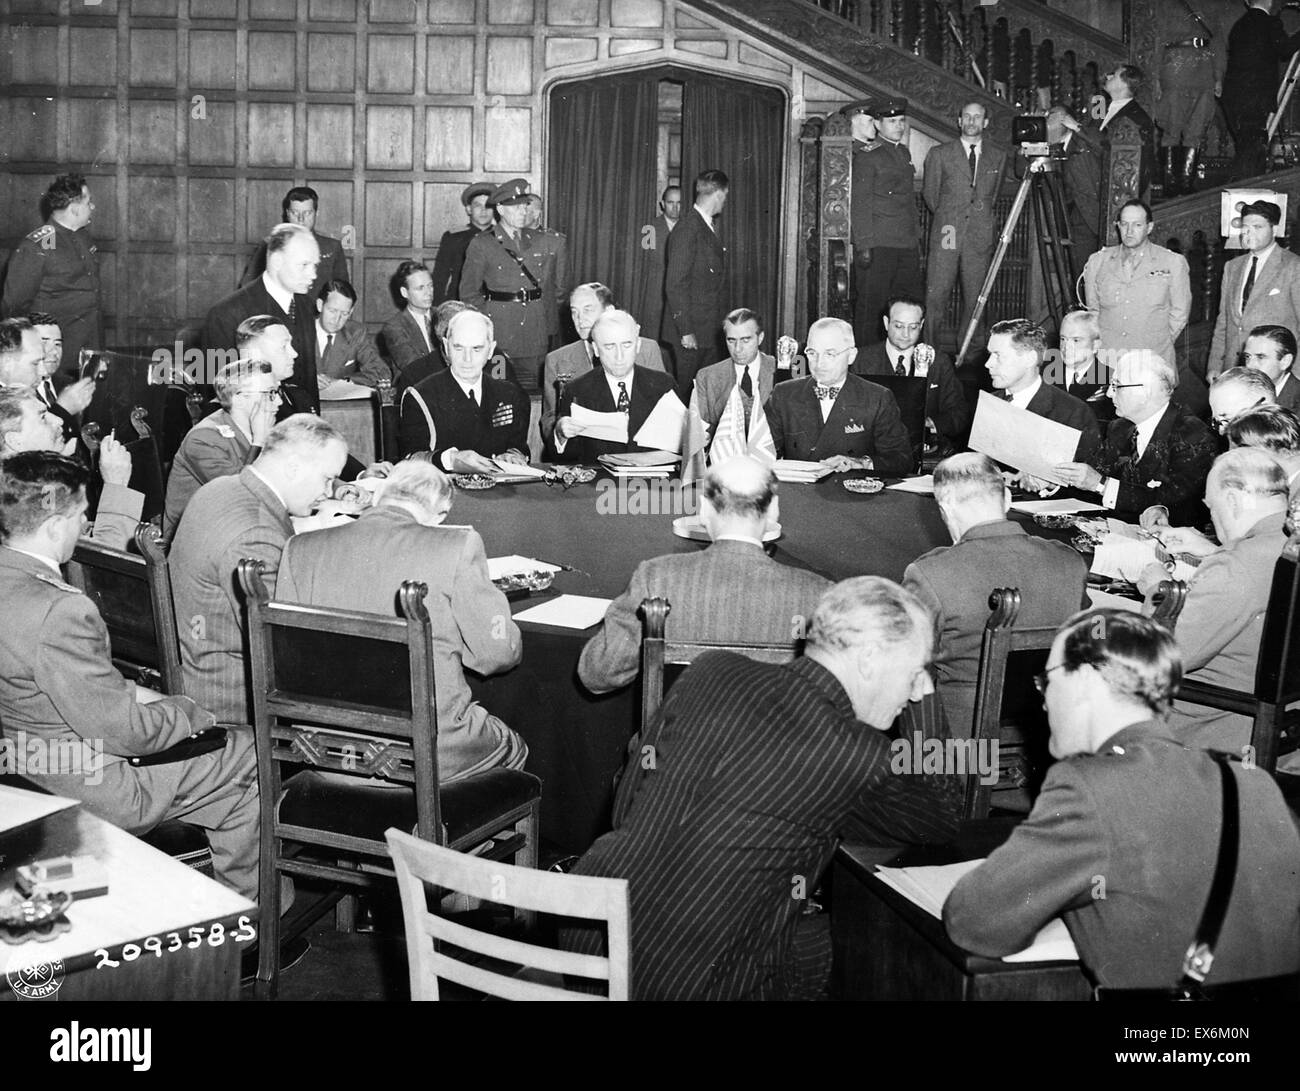 Stalin, Churchill, Attlee, Truman, and others at the Potsdam Conference, Germany, 19 Jul 1945 during world war two Stock Photo